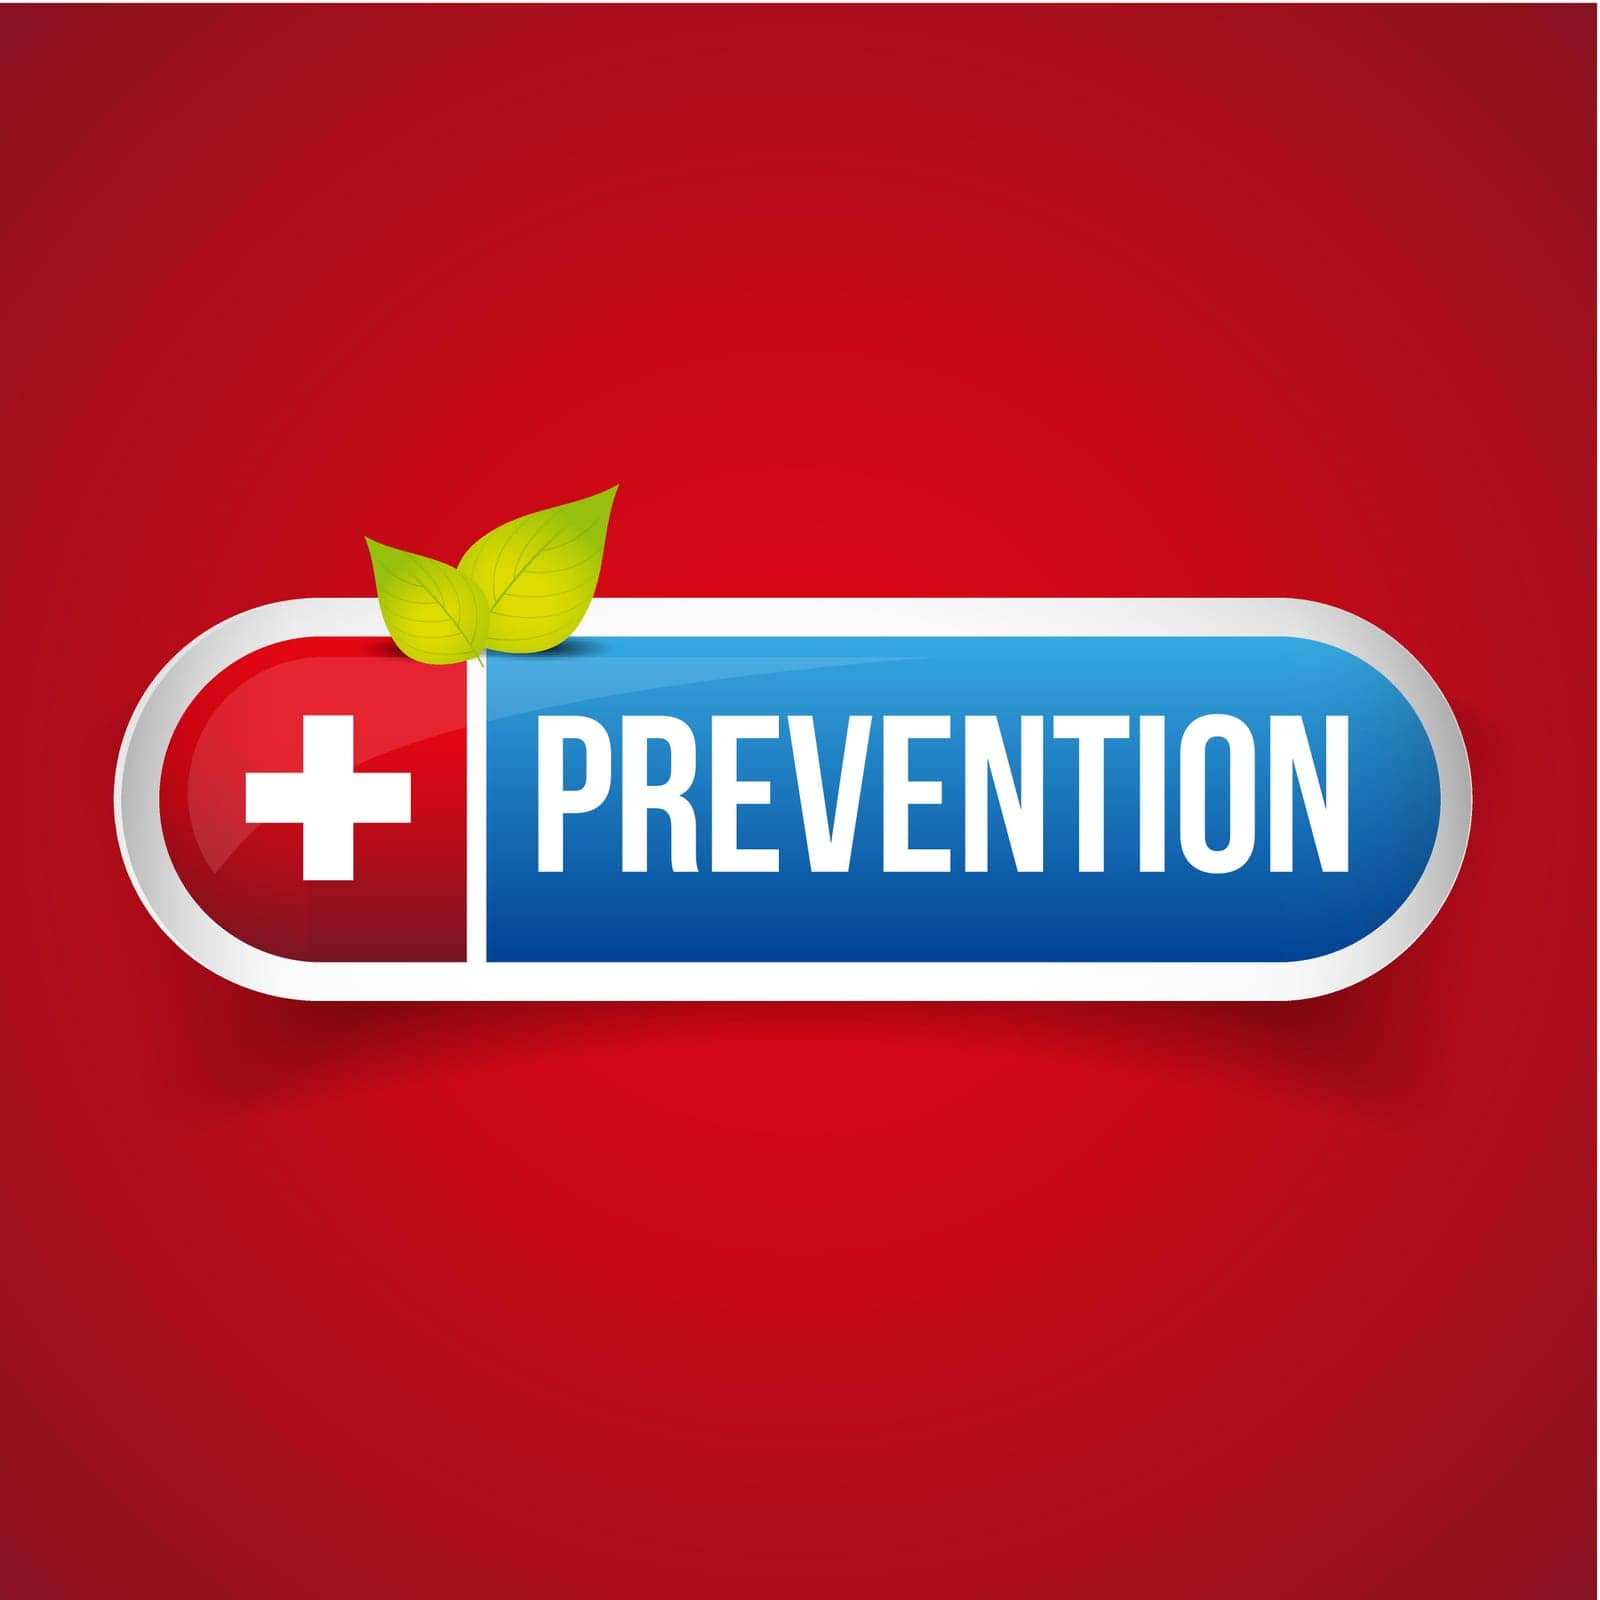 Prevention button vector icon by Nutil